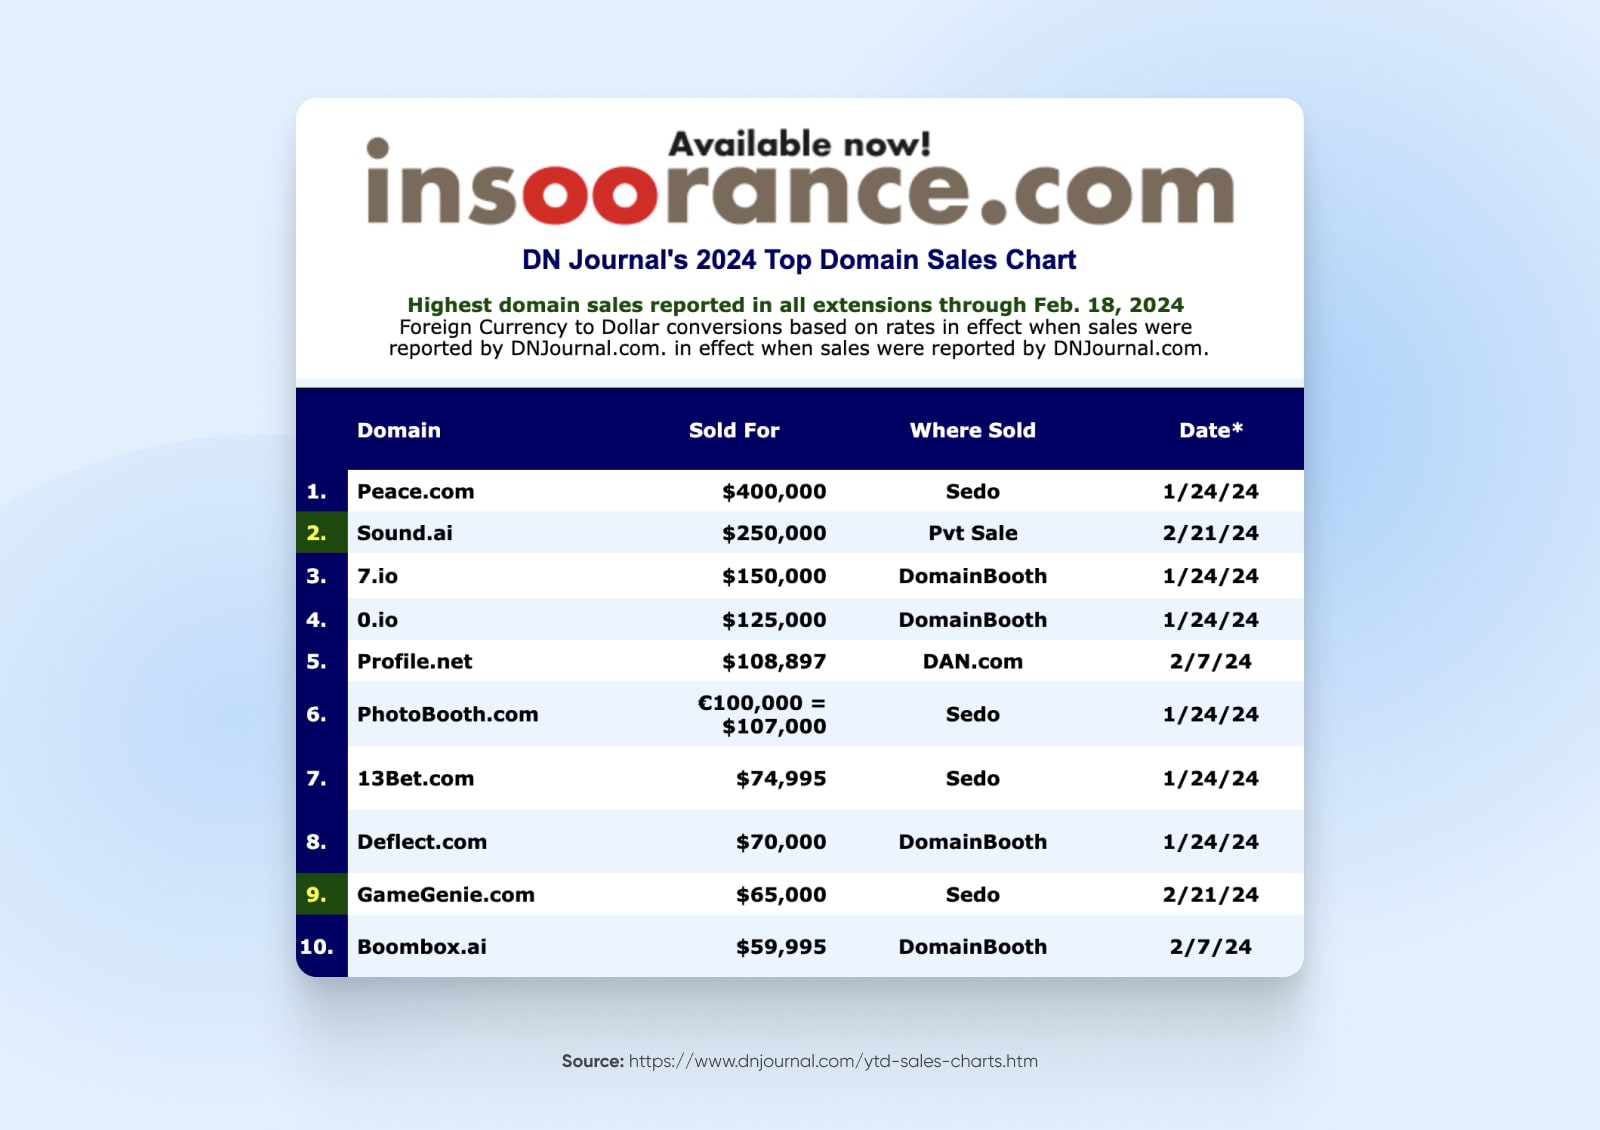 screenshot of insoorance.com shwoing the recently purchased domains, the highest on date 1/24/24 selling for $400,000